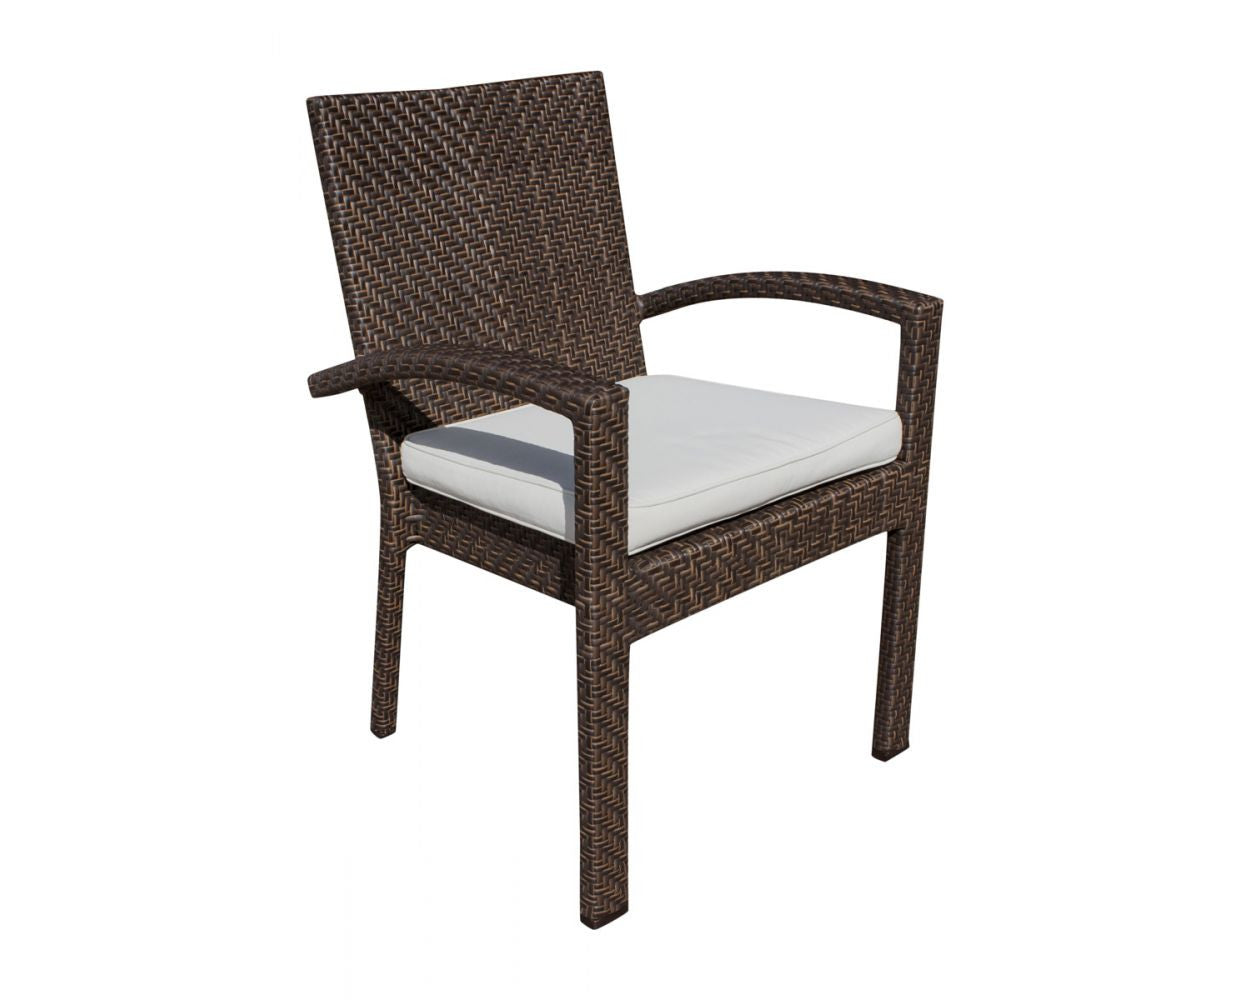 Hospitality Rattan Soho 5 PC Dining Arm Chair Group with Cushions